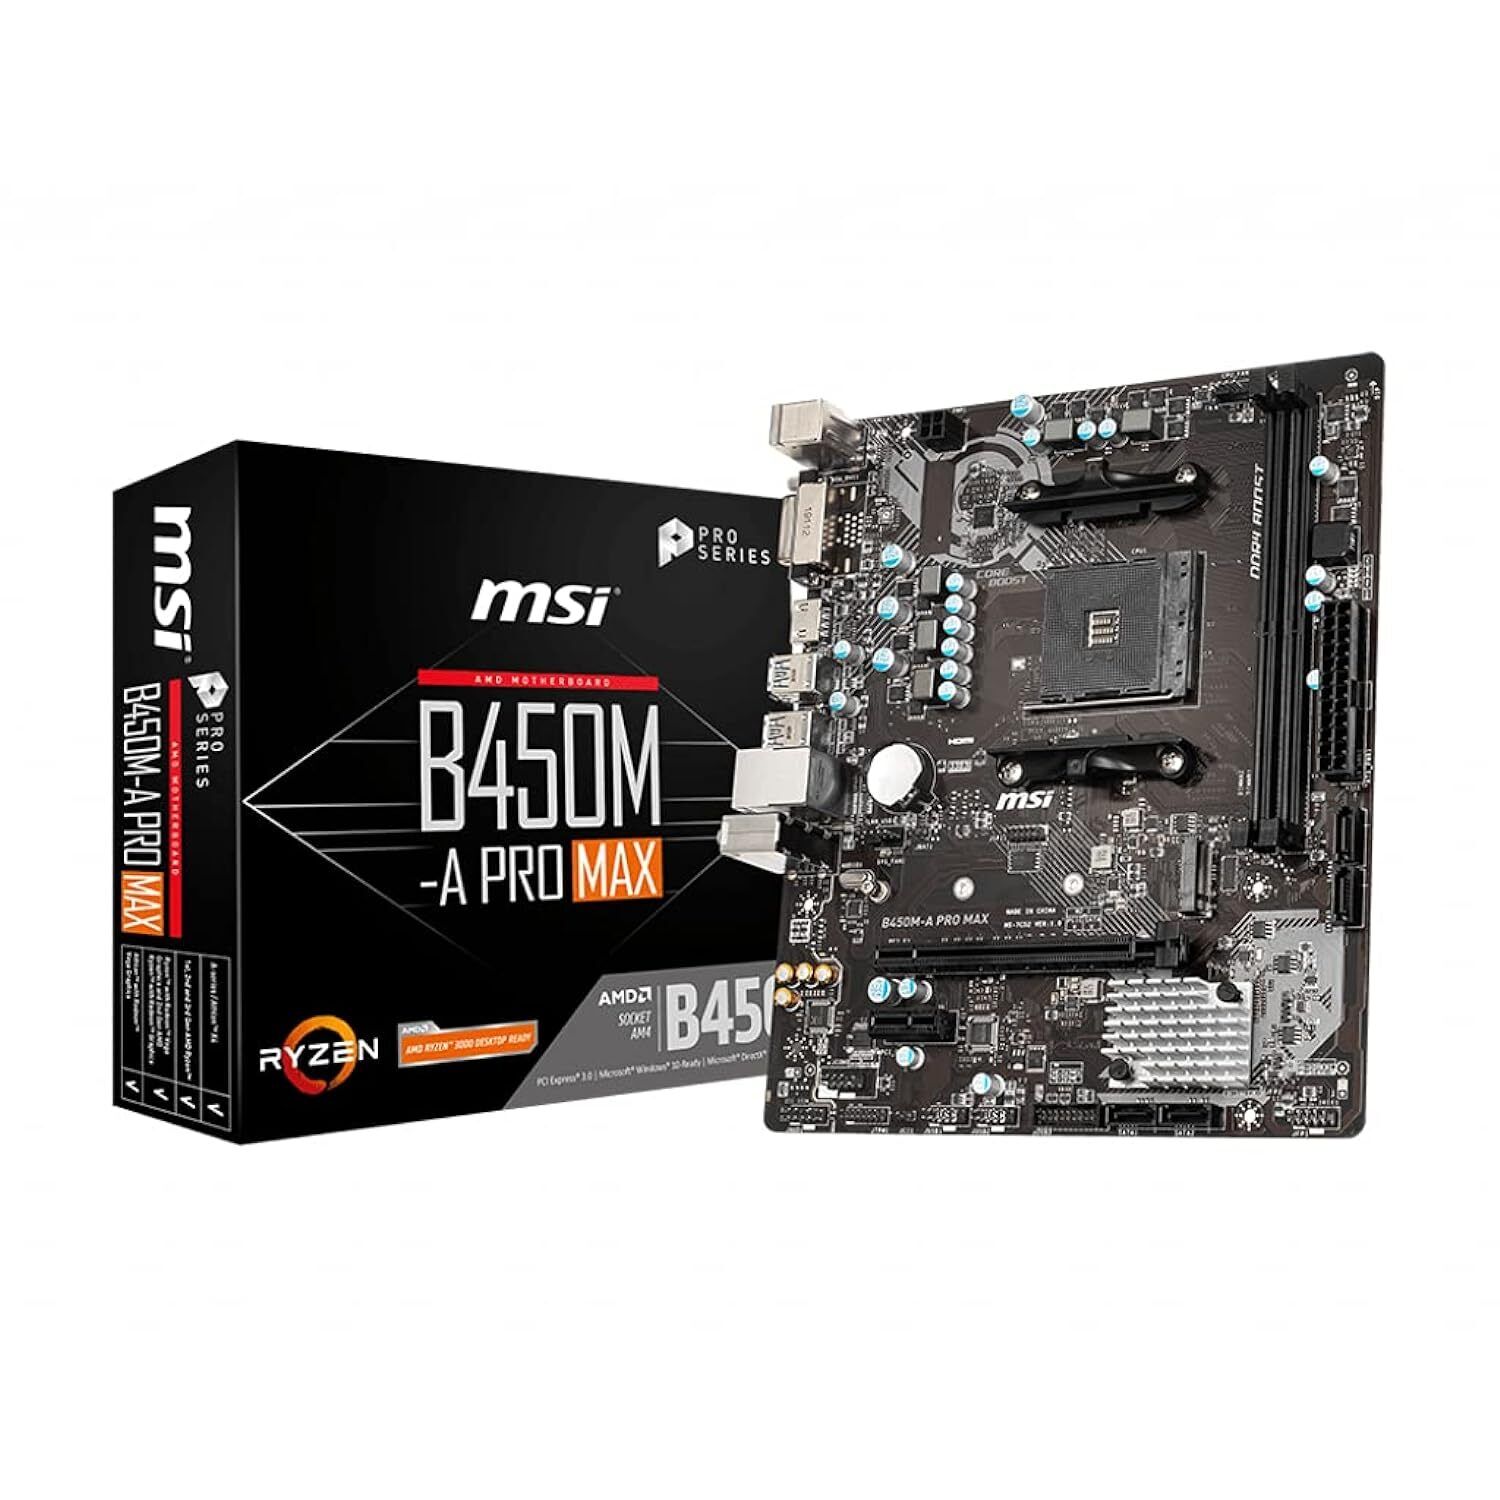 MSI B450M-A PRO MAX ProSeries Motherboard (ATX, 2ND and 3rd Gen, AM4, M.2, USB